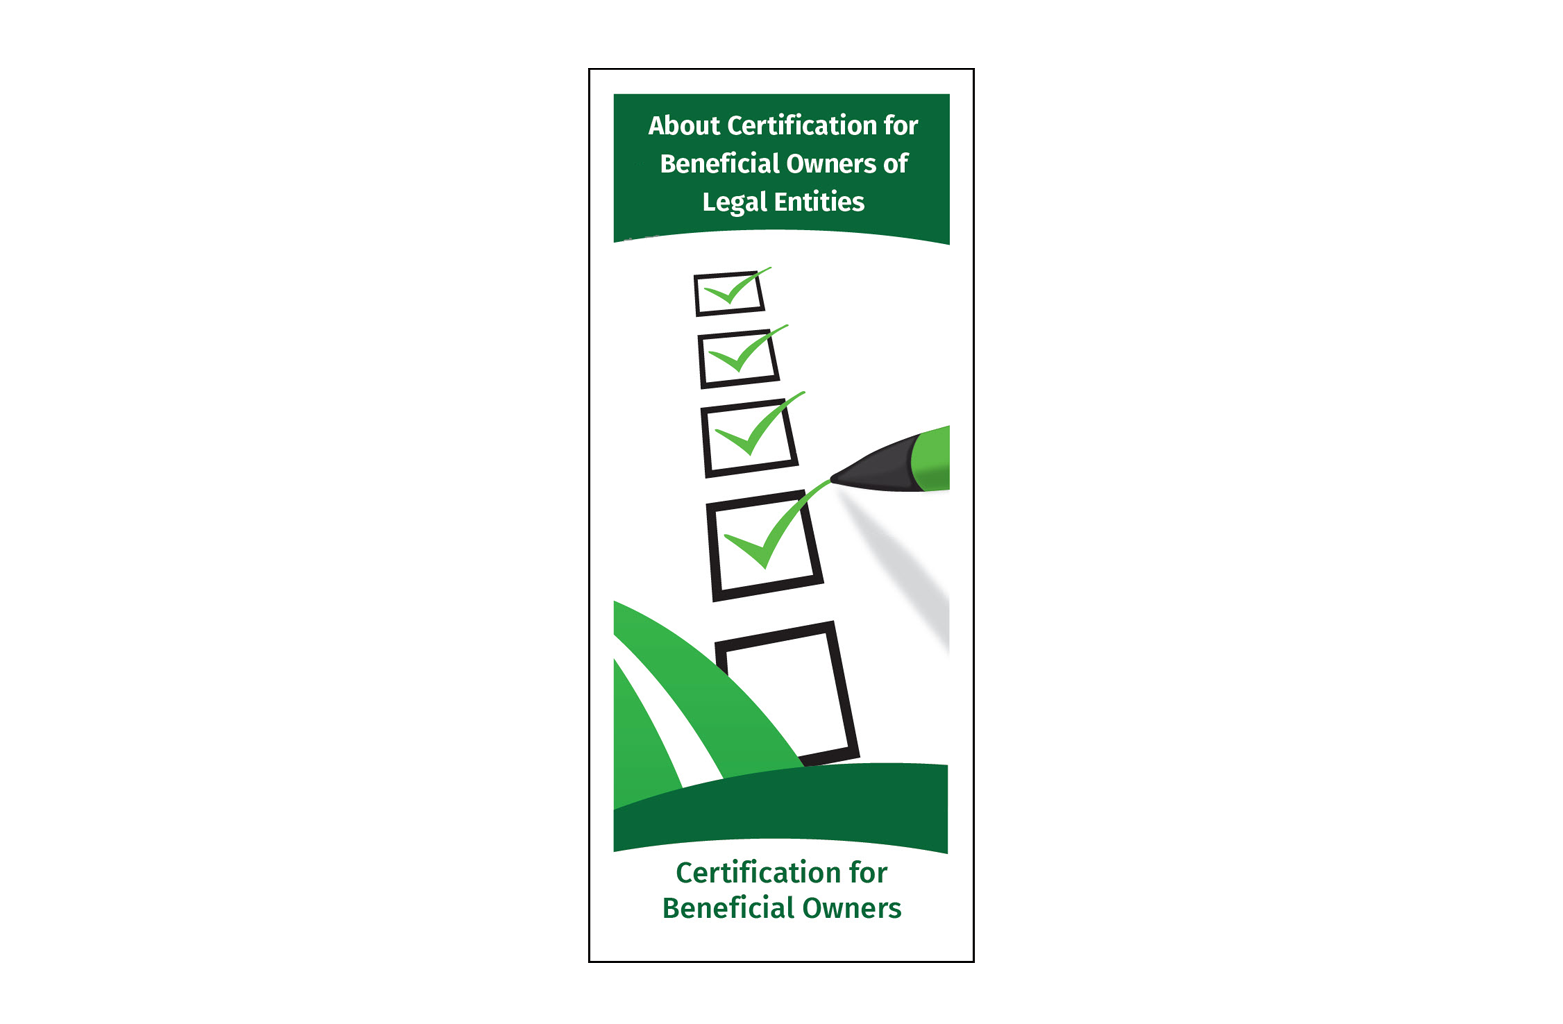 About Certification for Beneficial Owners